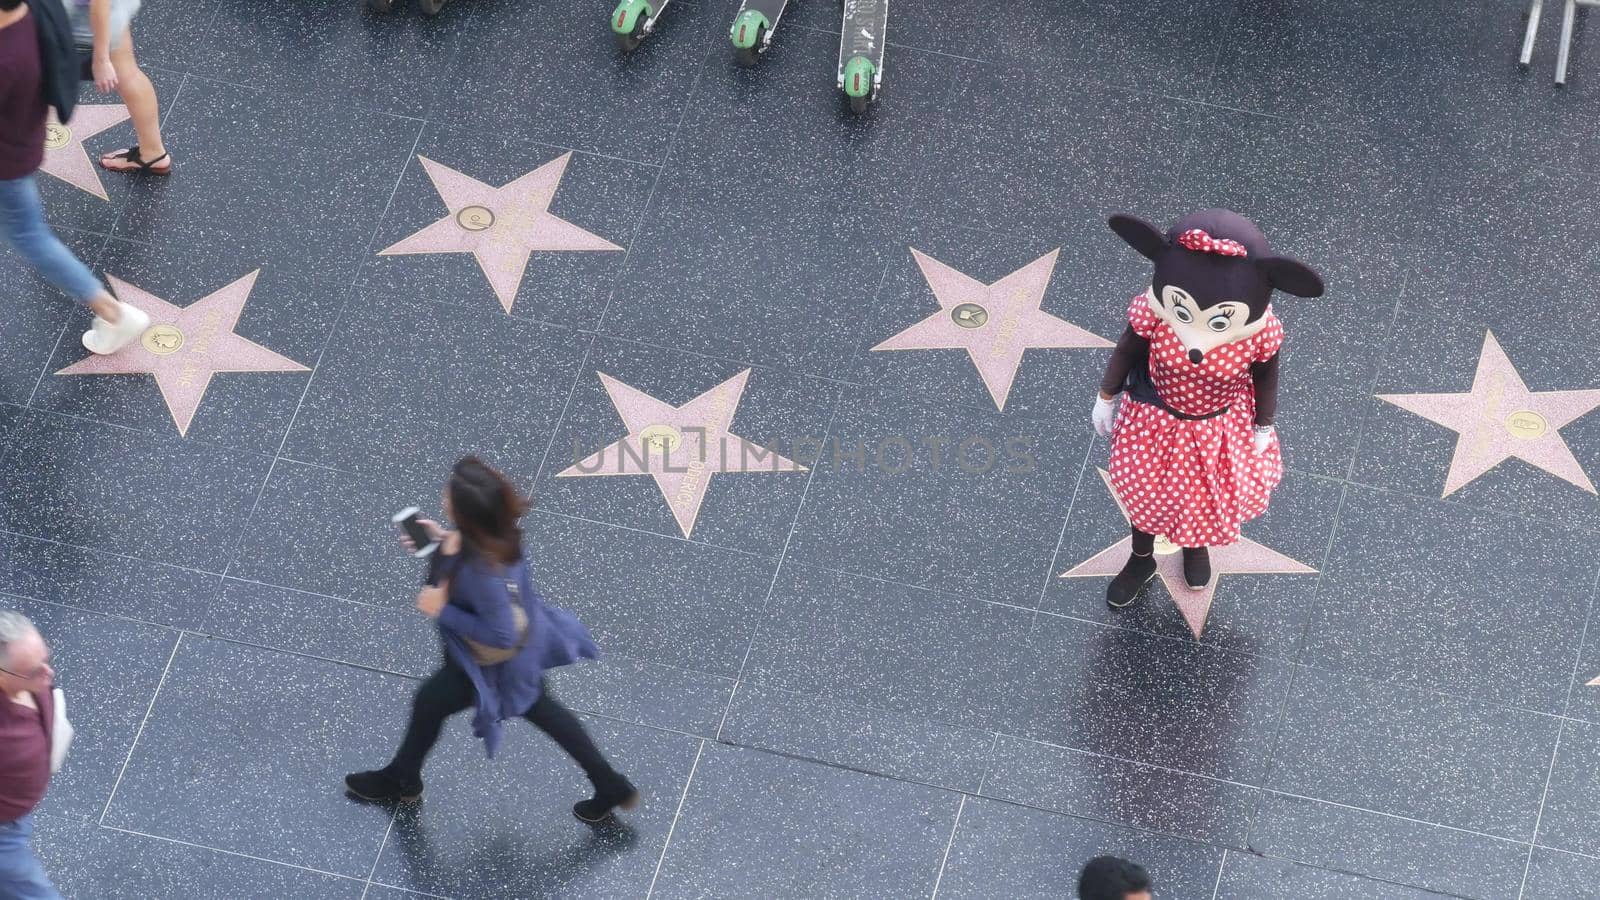 LOS ANGELES, CALIFORNIA, USA - 7 NOV 2019: Walk of fame promenade on Hollywood boulevard in LA. Pedastrians walking near celebrity stars on asphalt. Walkway floor near Dolby and TCL Chinese Theatre.